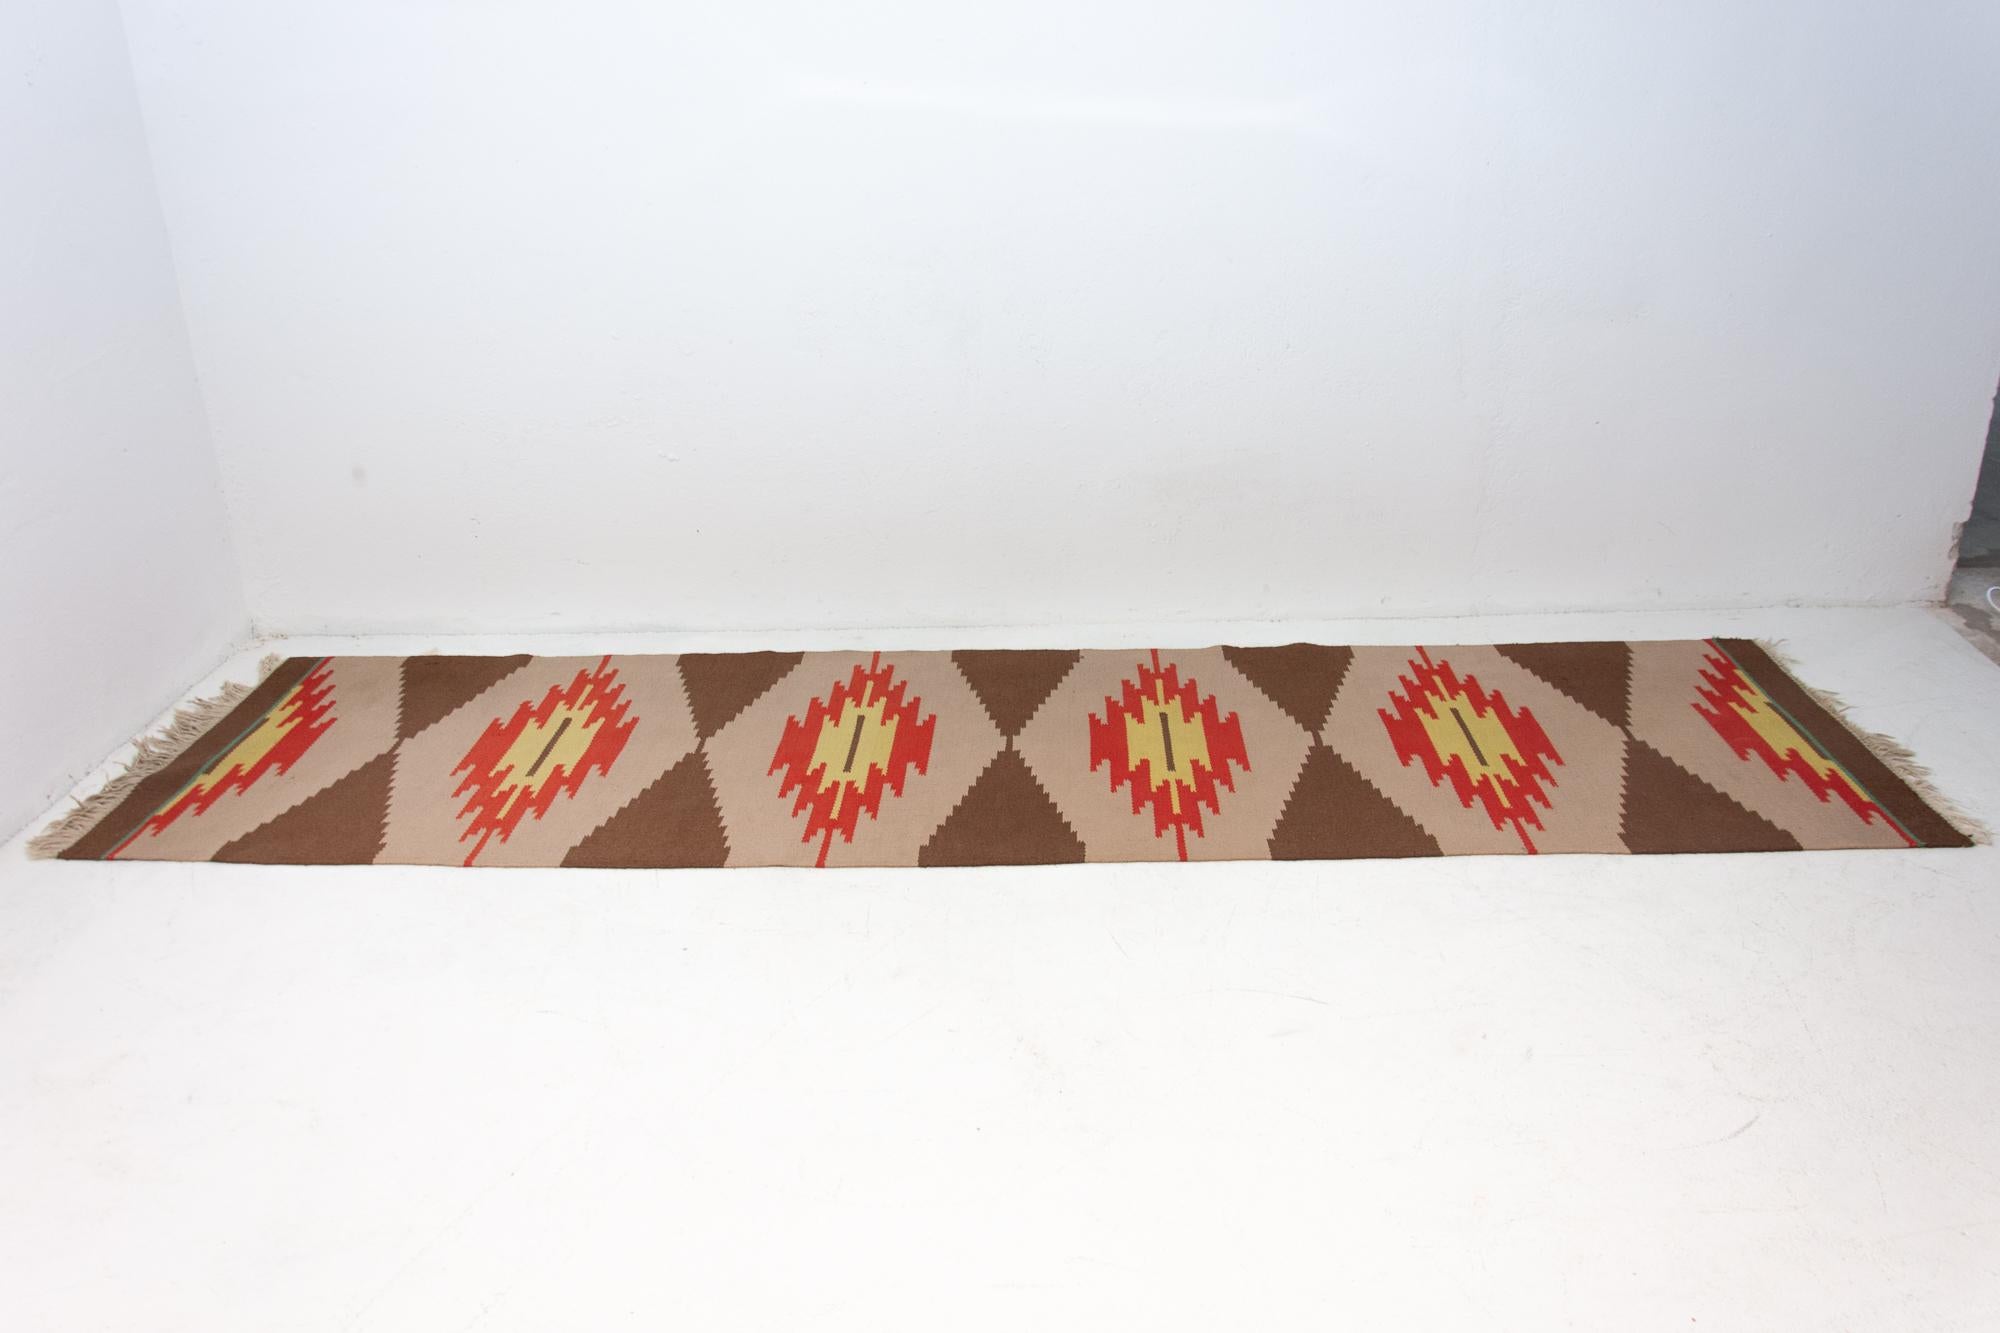 Mid-Century Modern rug Kelim. Made in the 1960s. It's associated with EXPO 58, handmade work, simple design.

Signs of age and using, slight abrasions at one point, the rug fringe are not complete, but overall in good Vintage condition.